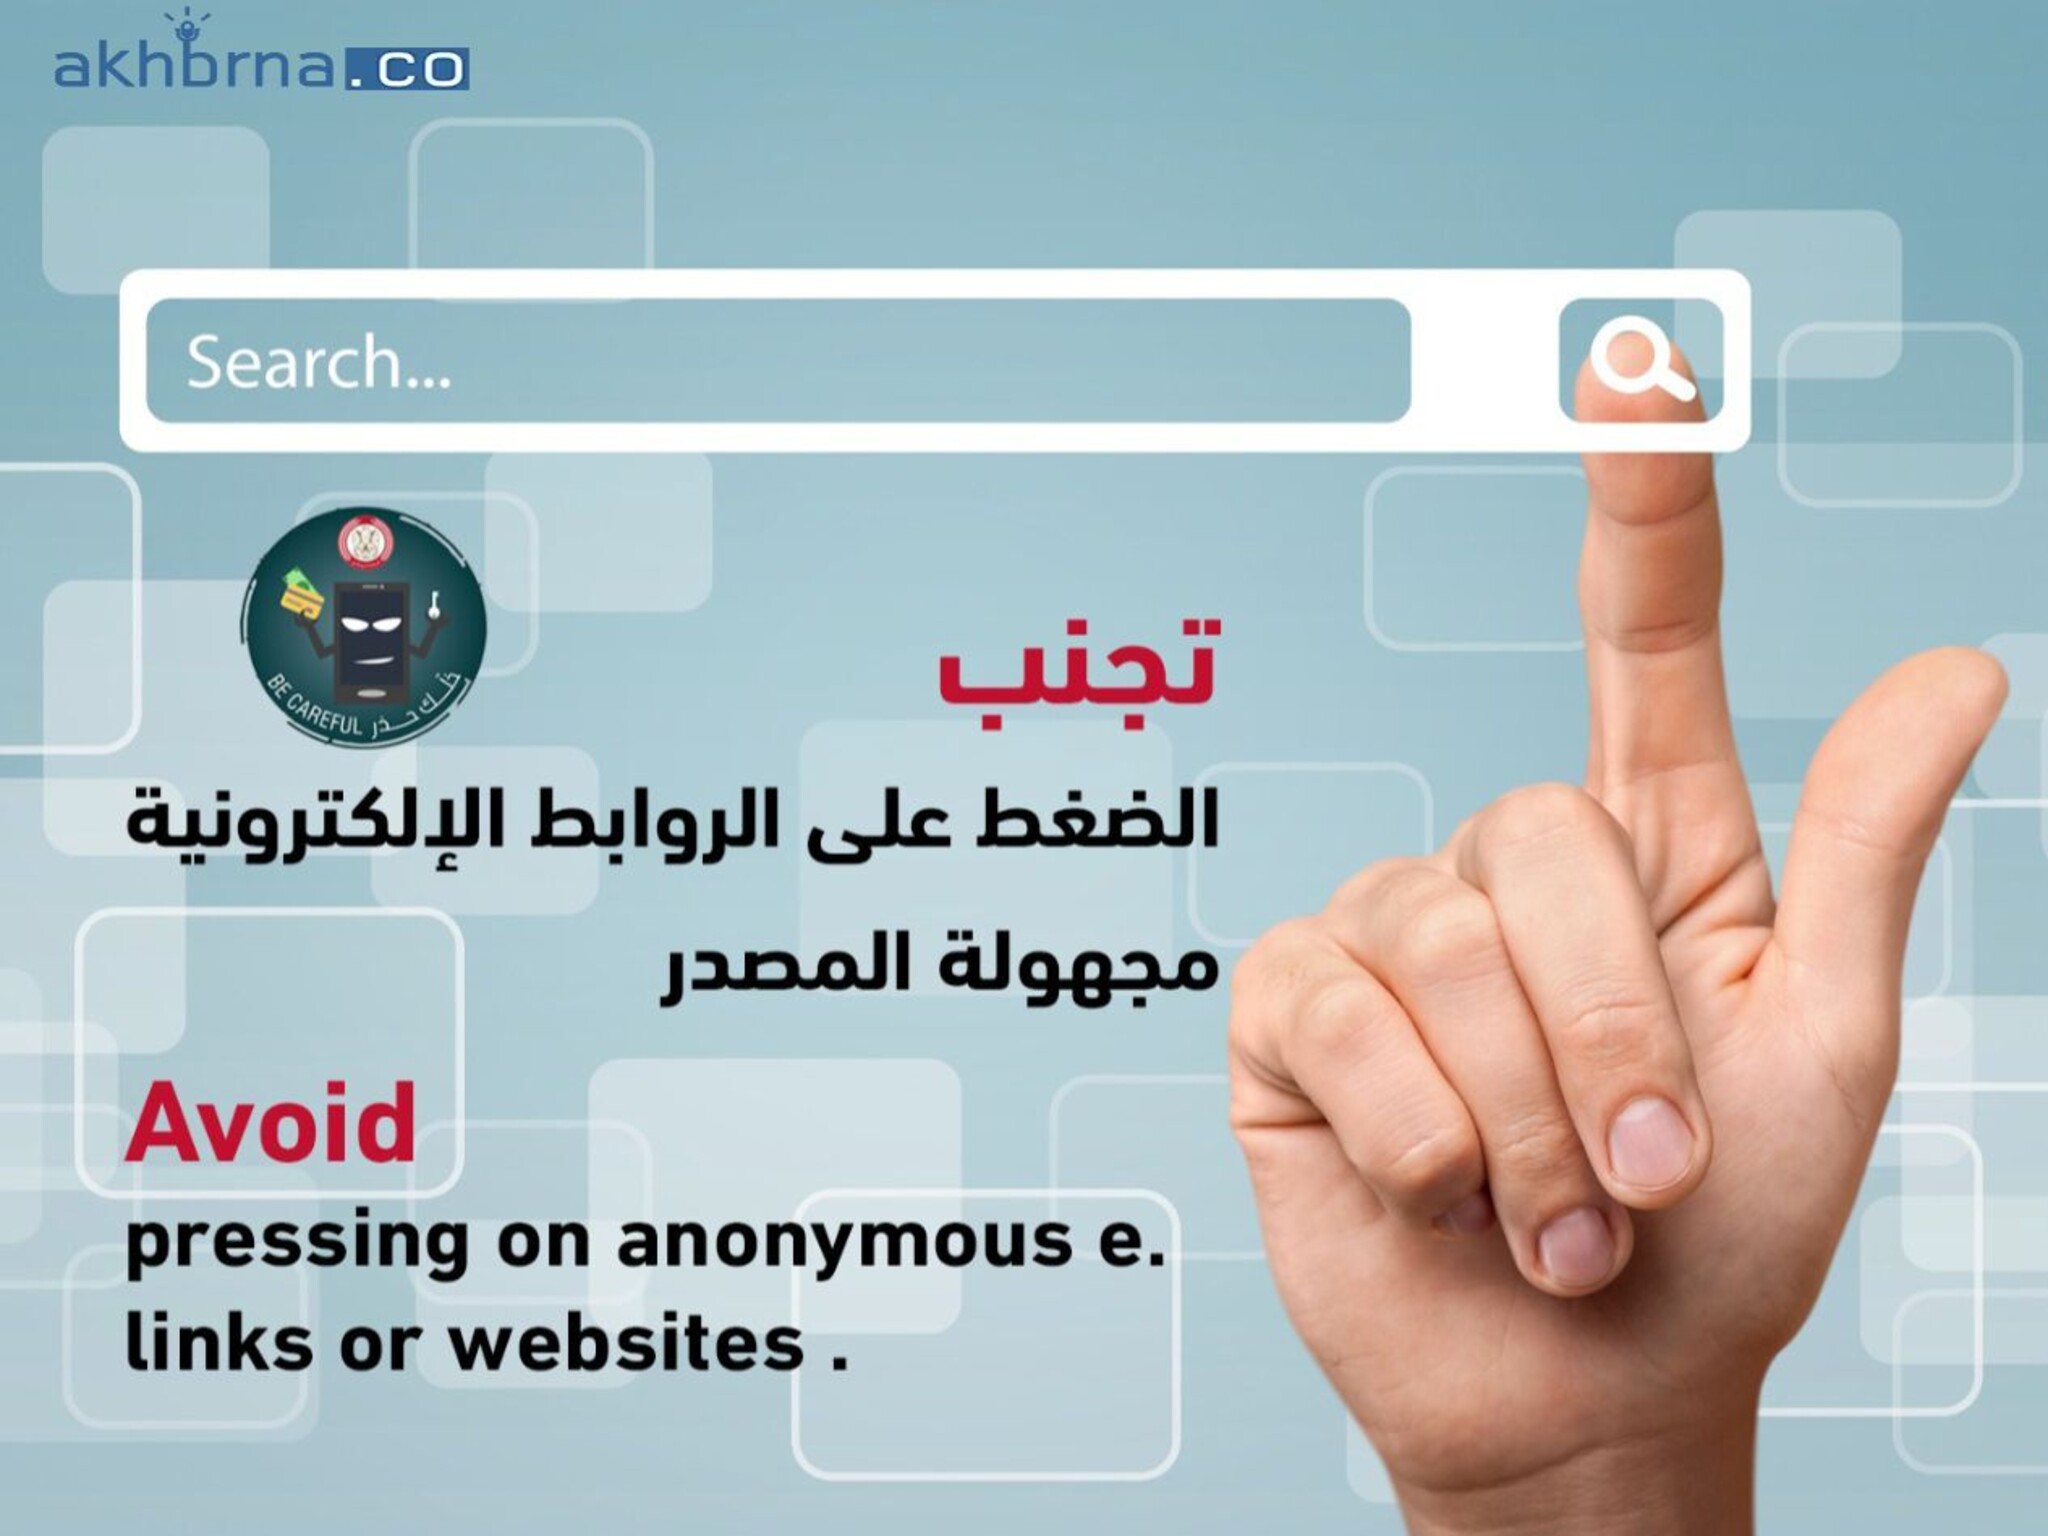 Abu Dhabi Police cautions residents against fraudulent electronic links